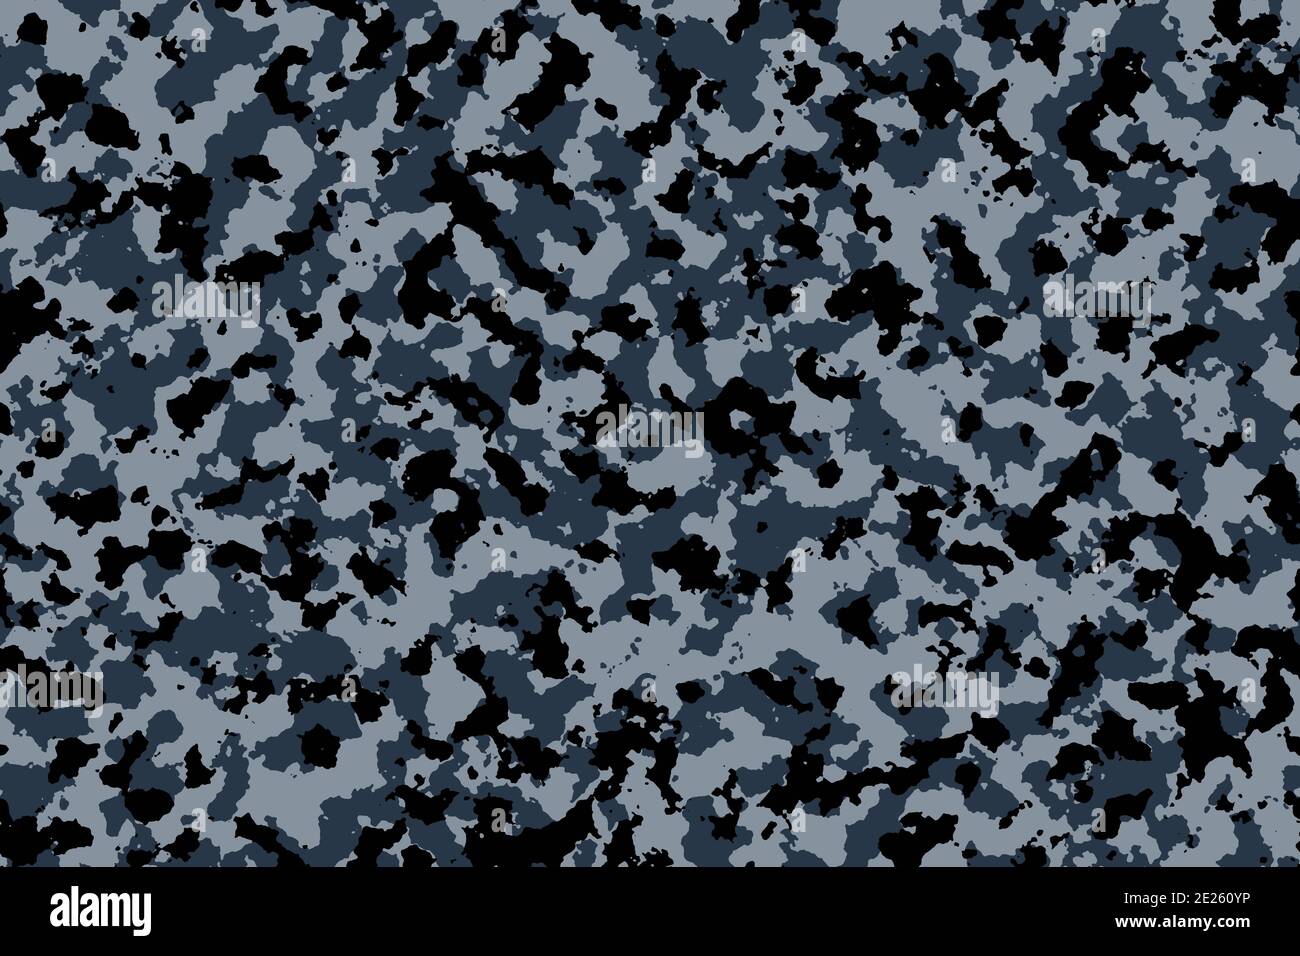 Camouflage military pattern background. Black blue gray color illustration Stock Photo